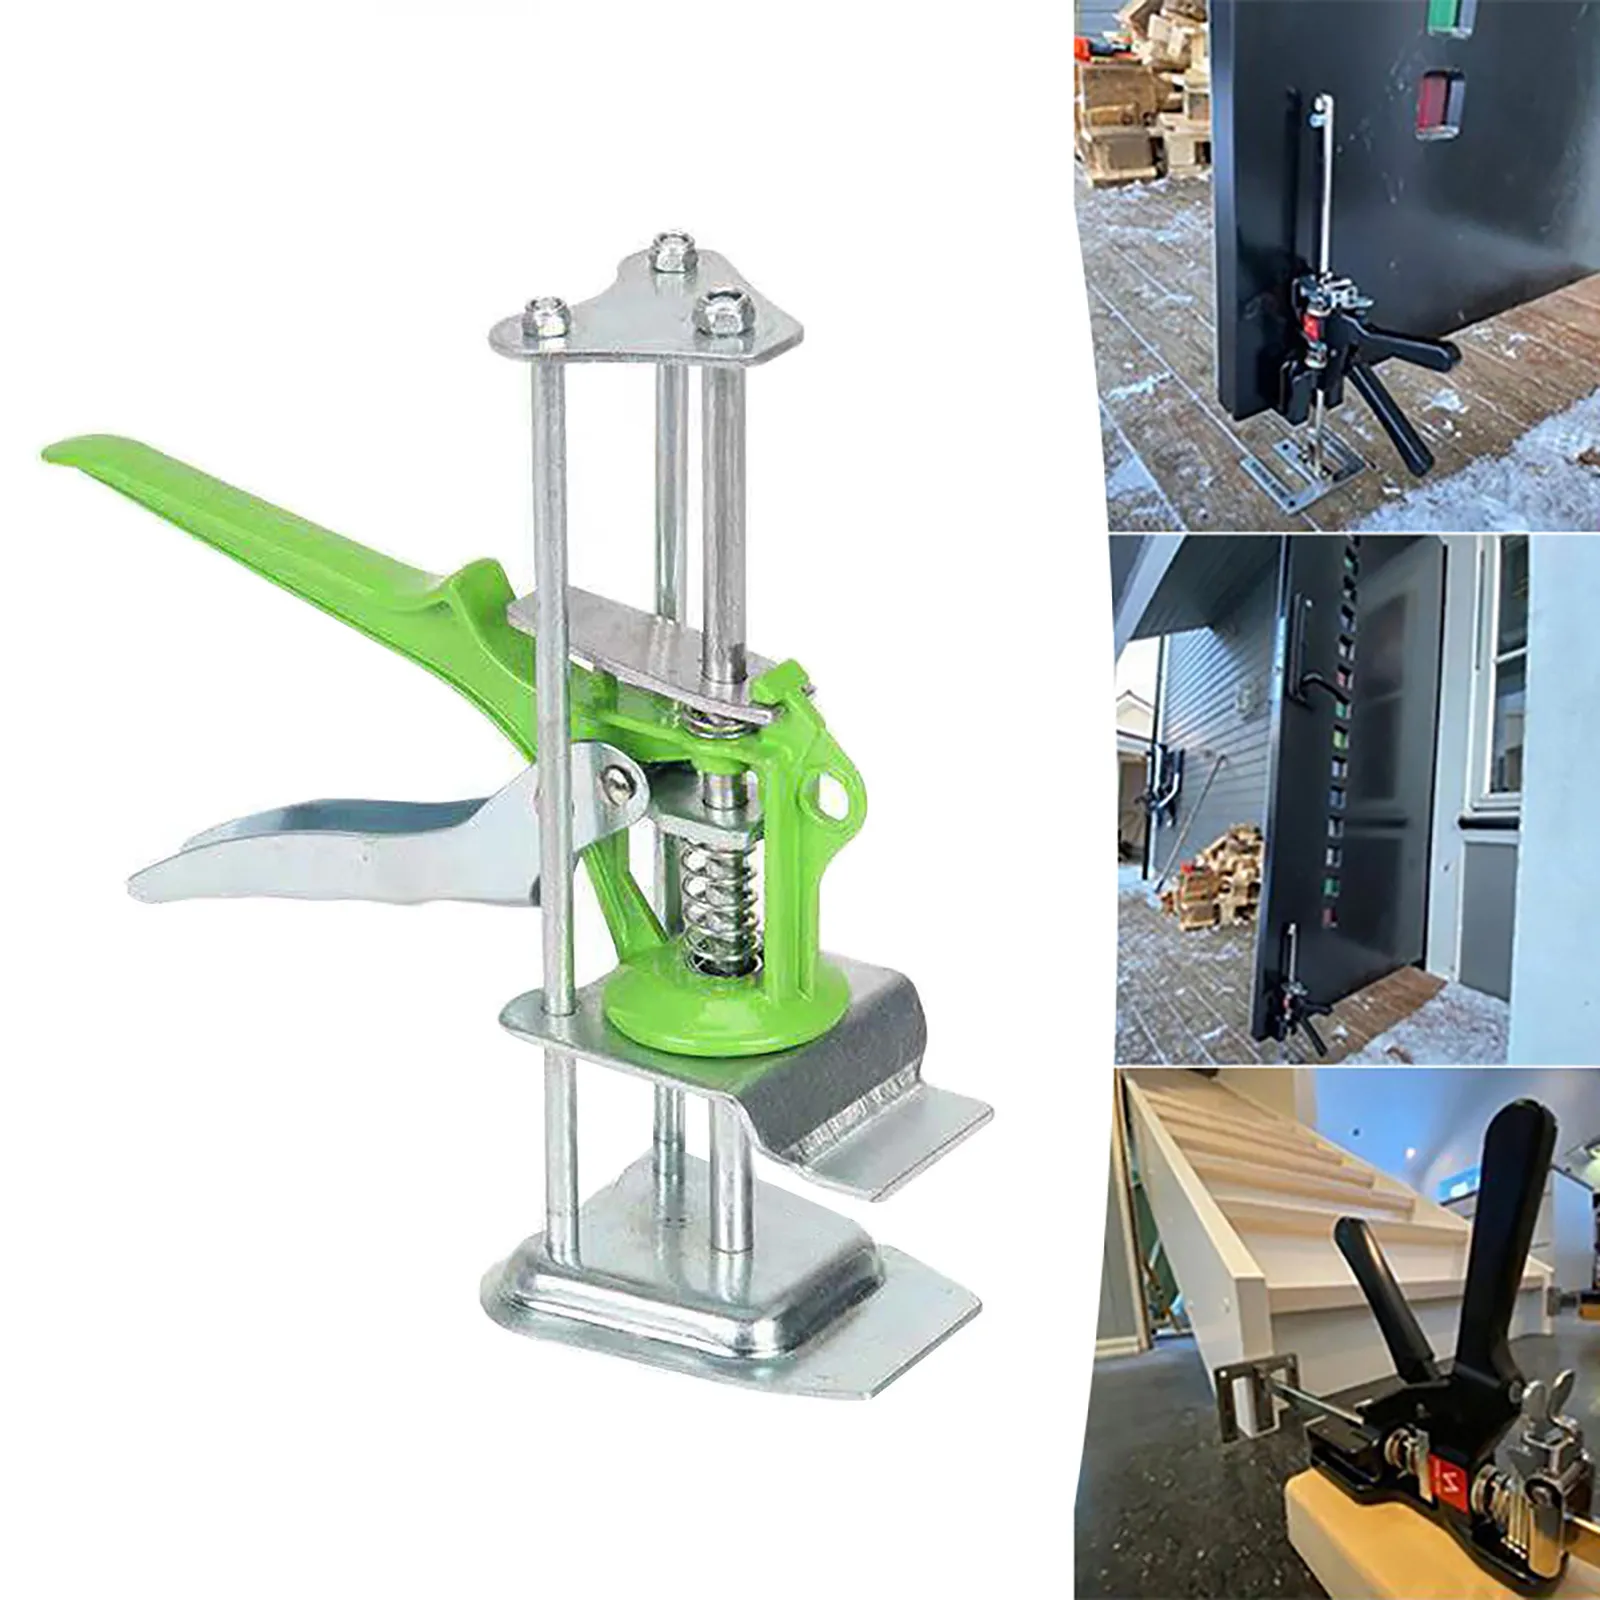 

Pirate Arm Leveling Lifter Auxiliary Tool Lifting Leveler Door Use Board Lifter Strong Plaster Sheet Repair Anti Slip Hand Tool